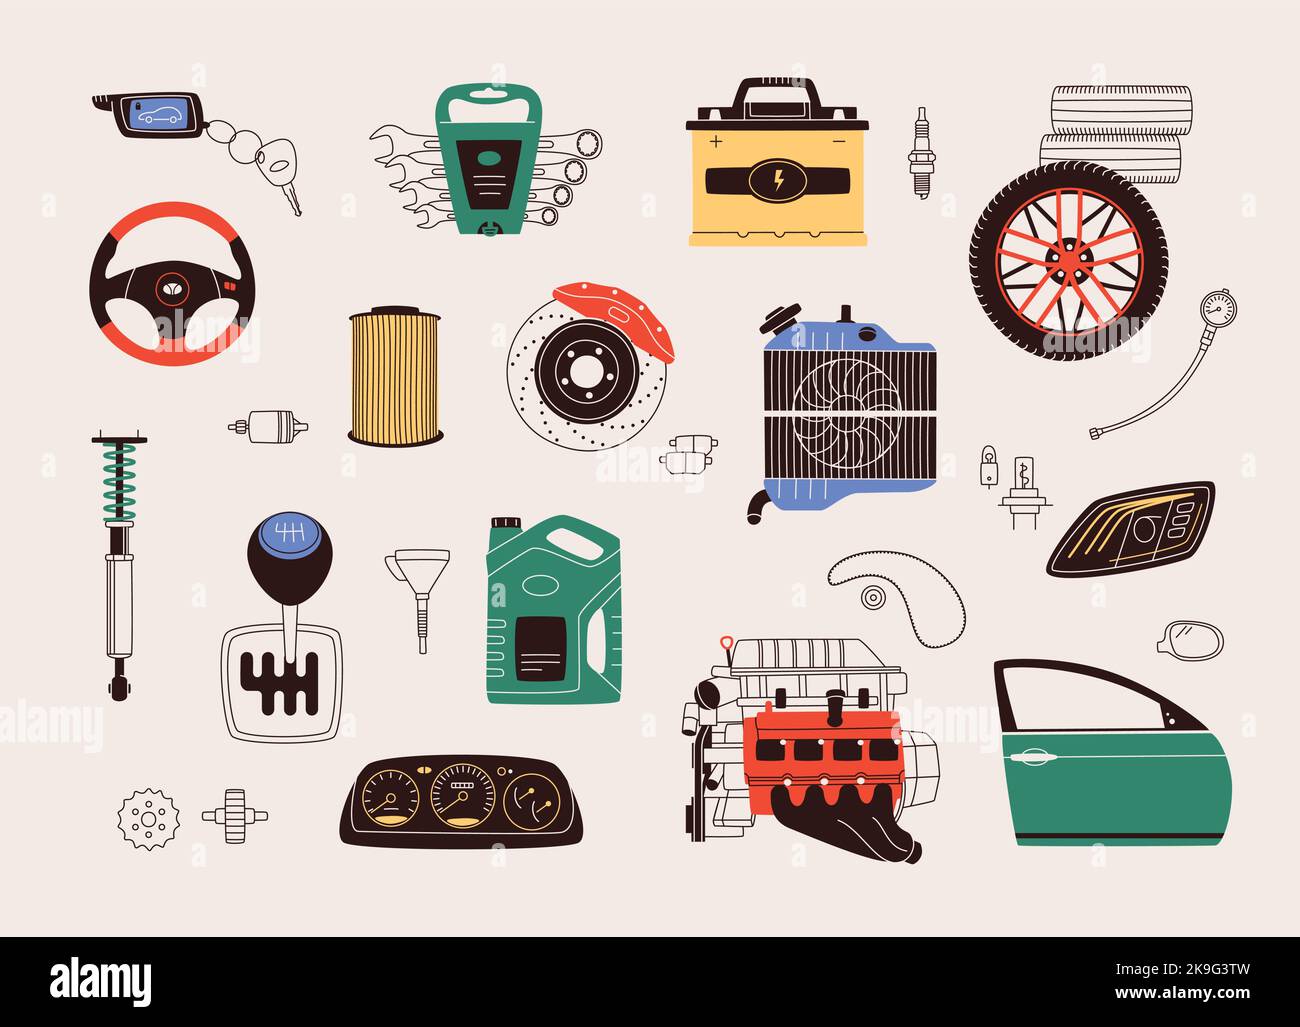 Flat design vector illustration of car parts, spares and accessories. Set includes auto parts such as engine, gearbox, transmission, wheel, battery. Stock Vector